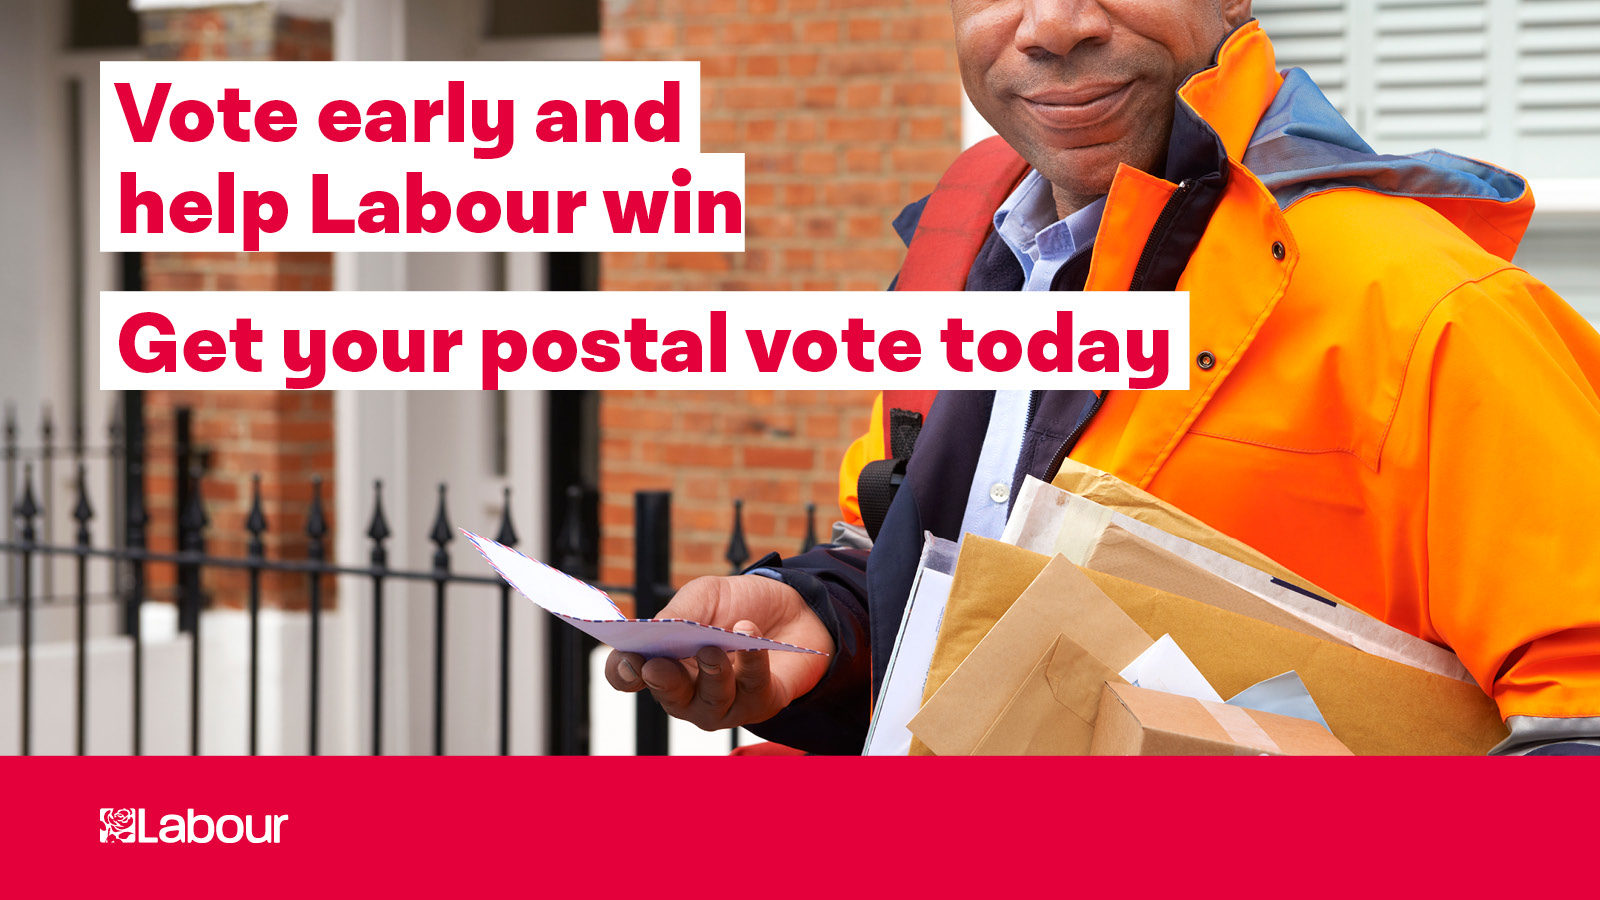 <a href="https://postalvote.labour.org.uk/">Sign up for a Postal Vote this year</a>